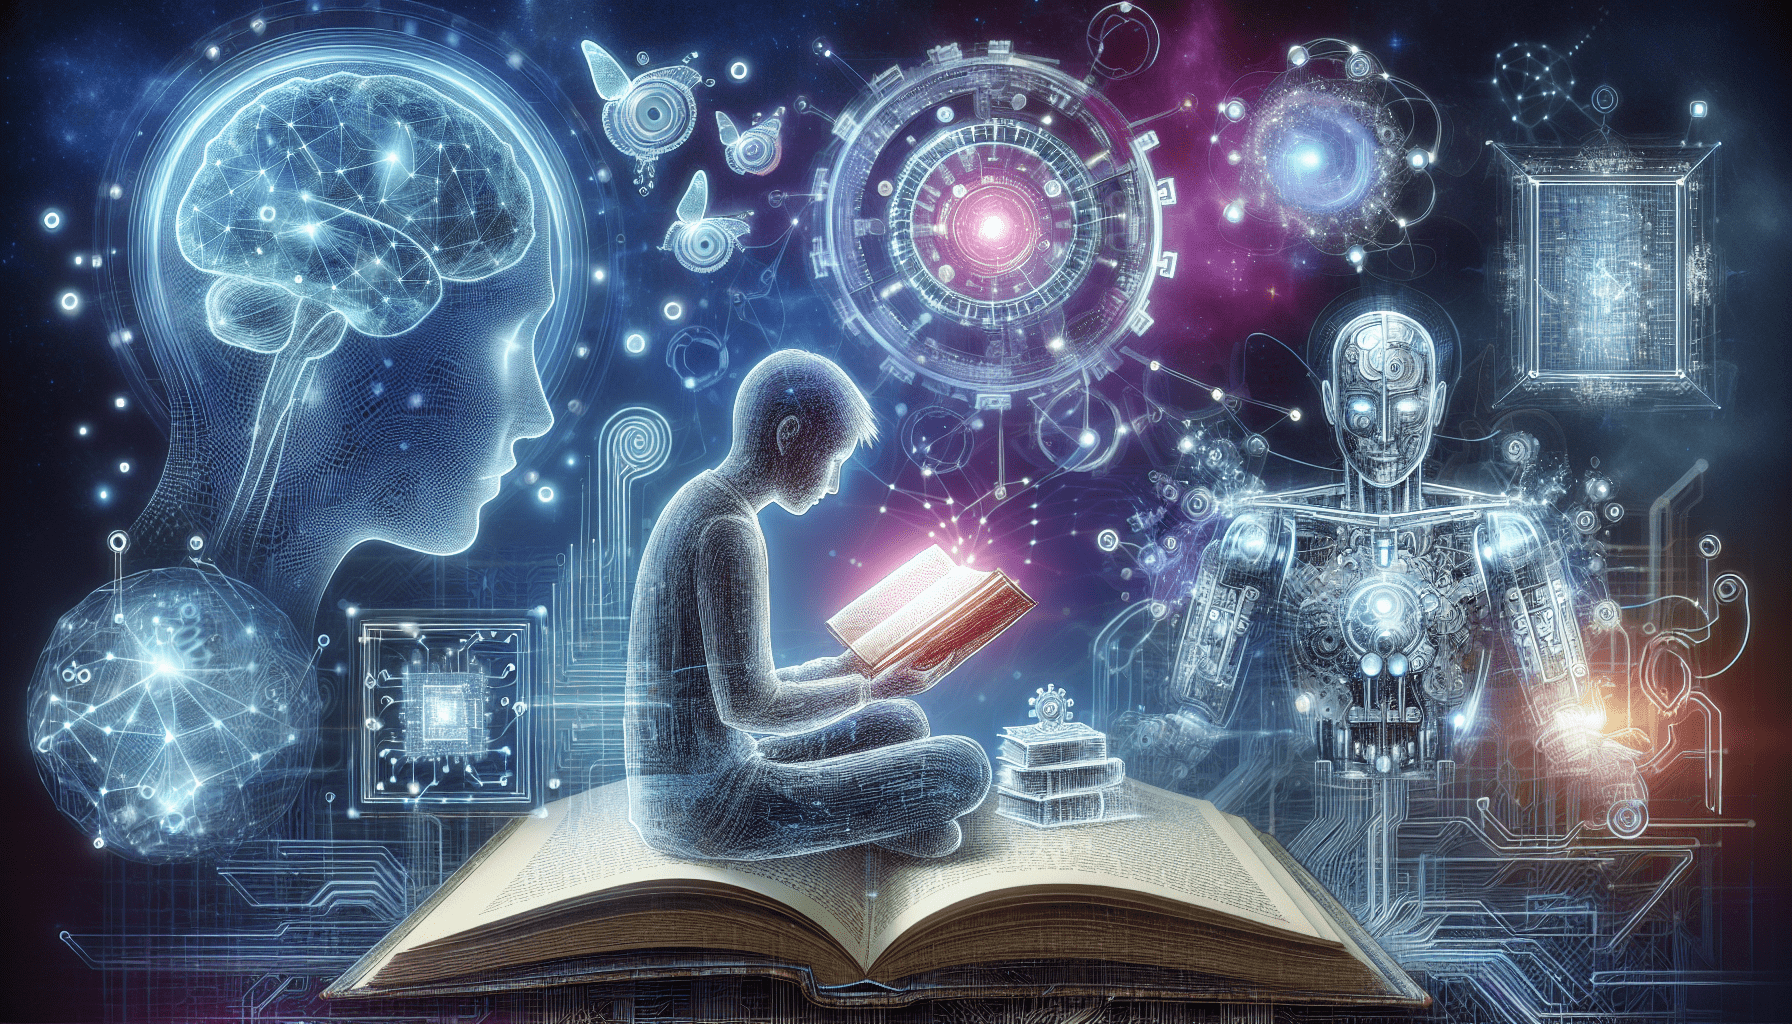 Illustration of a person embracing the concept of lifelong learning while surrounded by AI-related symbols and technologies